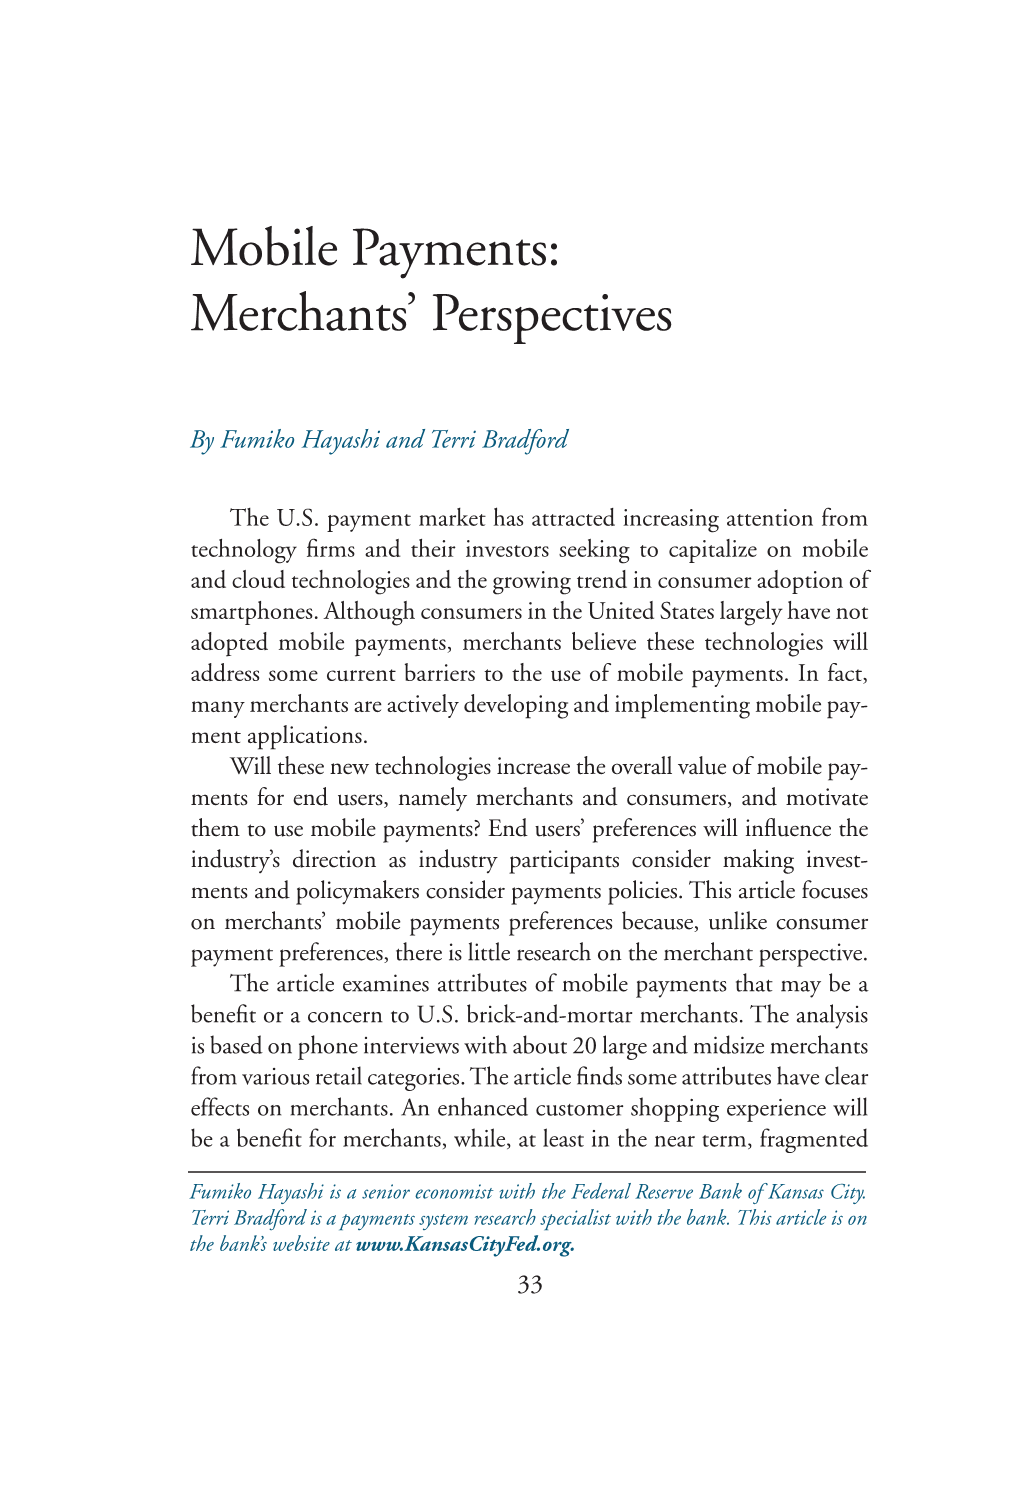 Mobile Payments: Merchants’ Perspectives